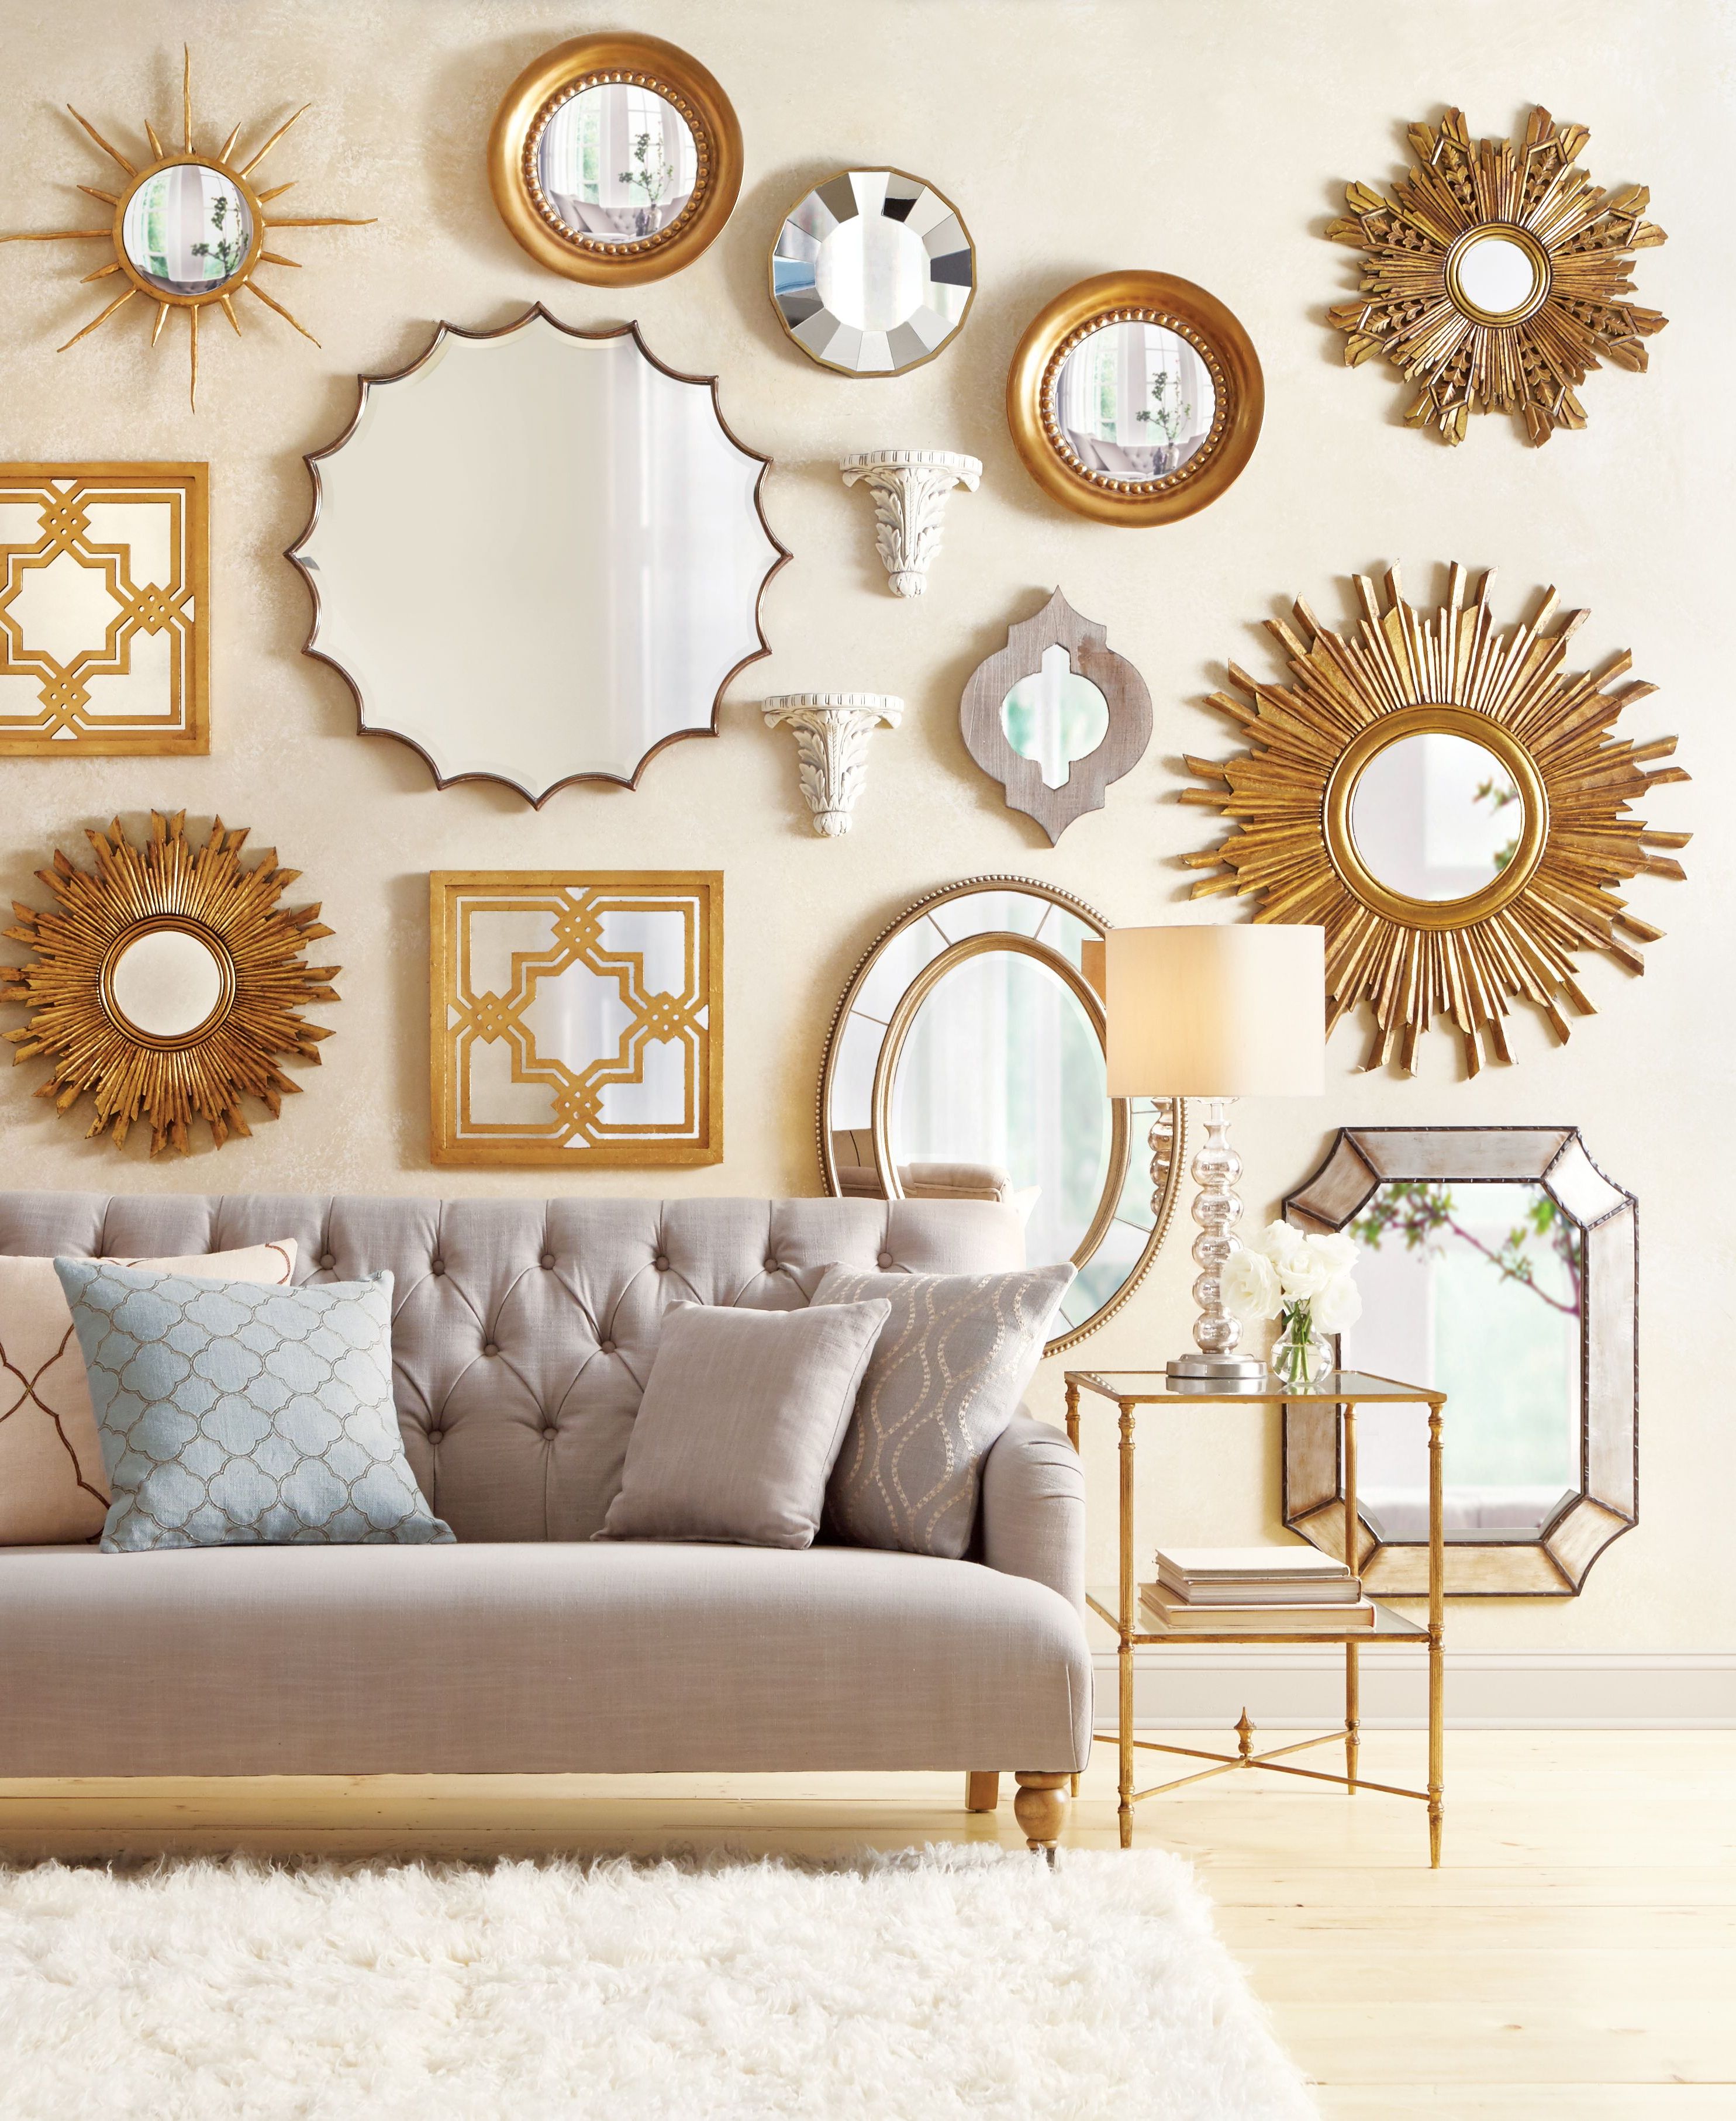 2018 Horoscope: We Know What Your Zodiac Sign Will Love Next Year With Regard To Current Mirrored Wall Mirrors (View 20 of 20)